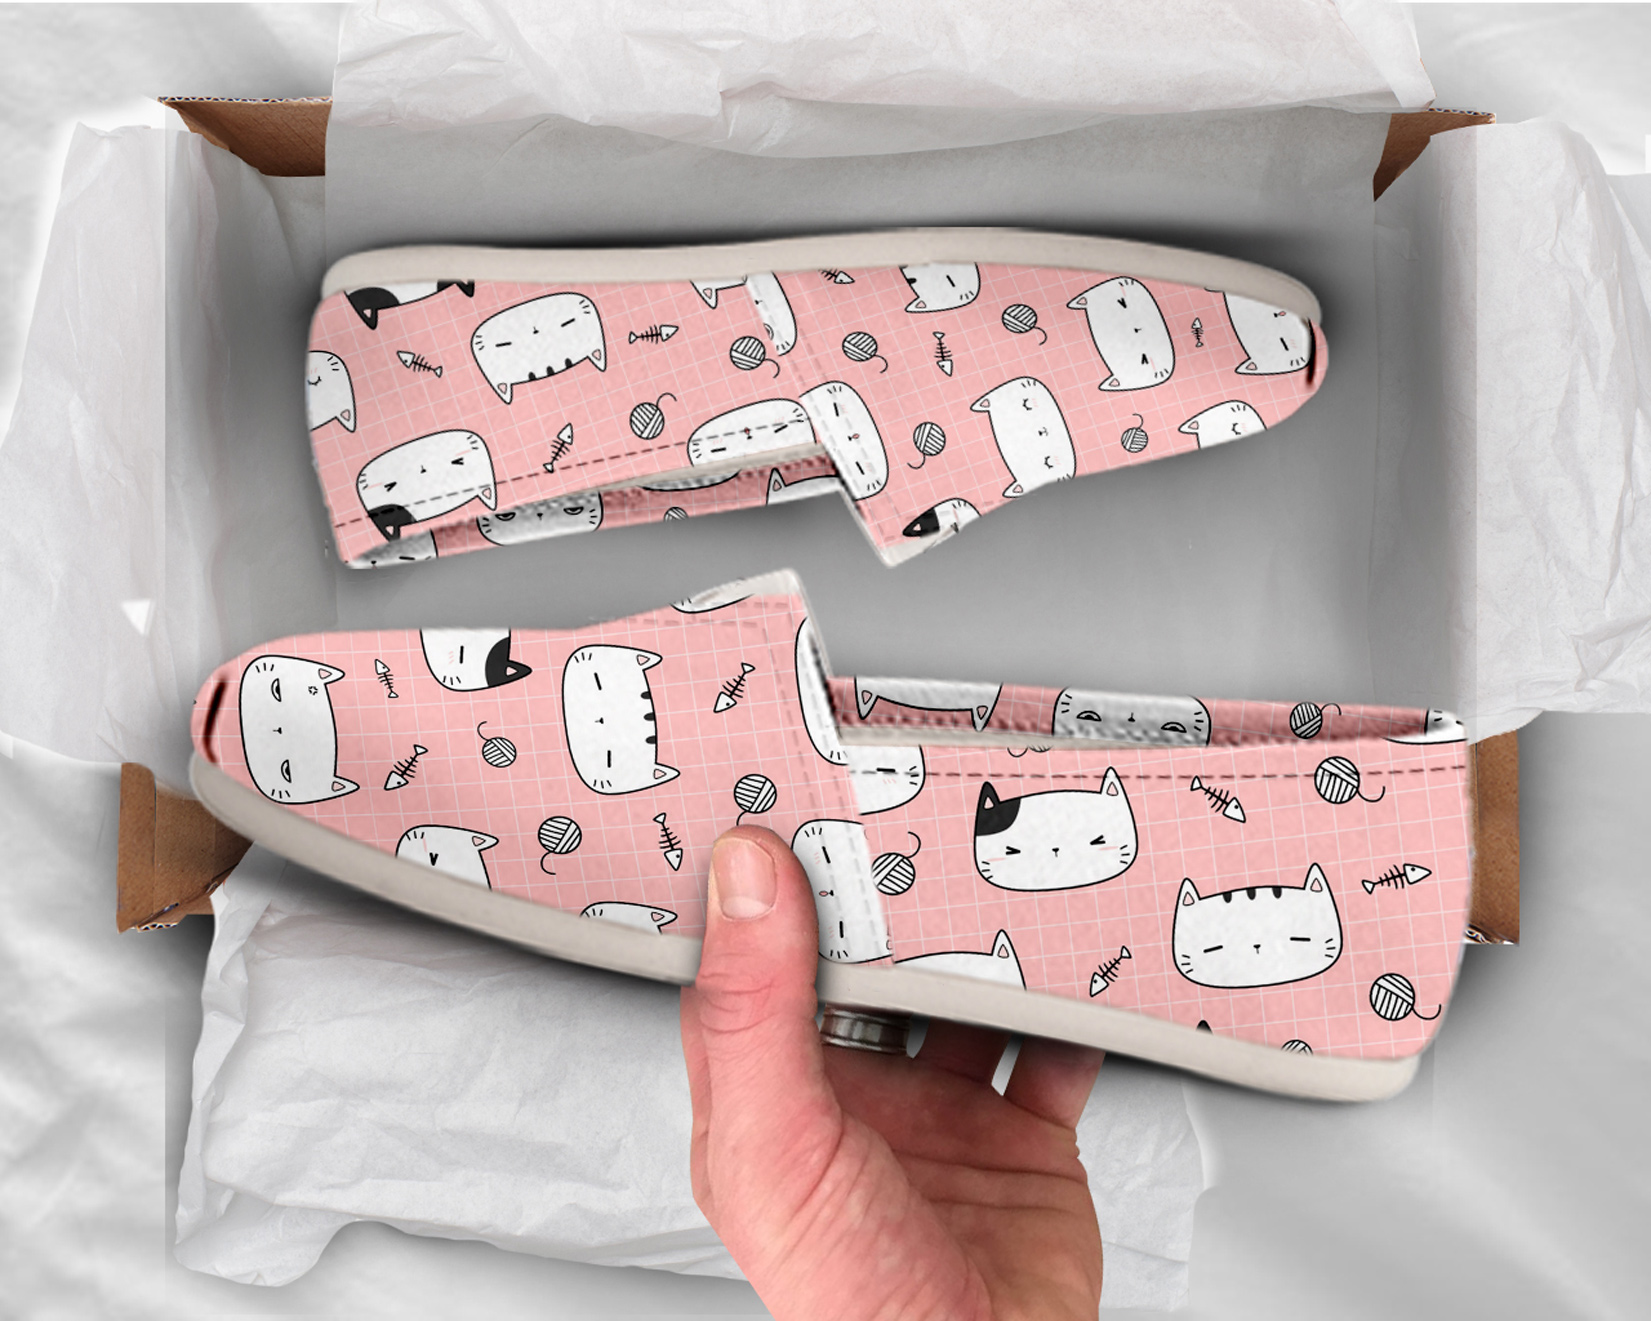 Pink Casual Cat Shoes | Custom Canvas Sneakers For Kids & Adults